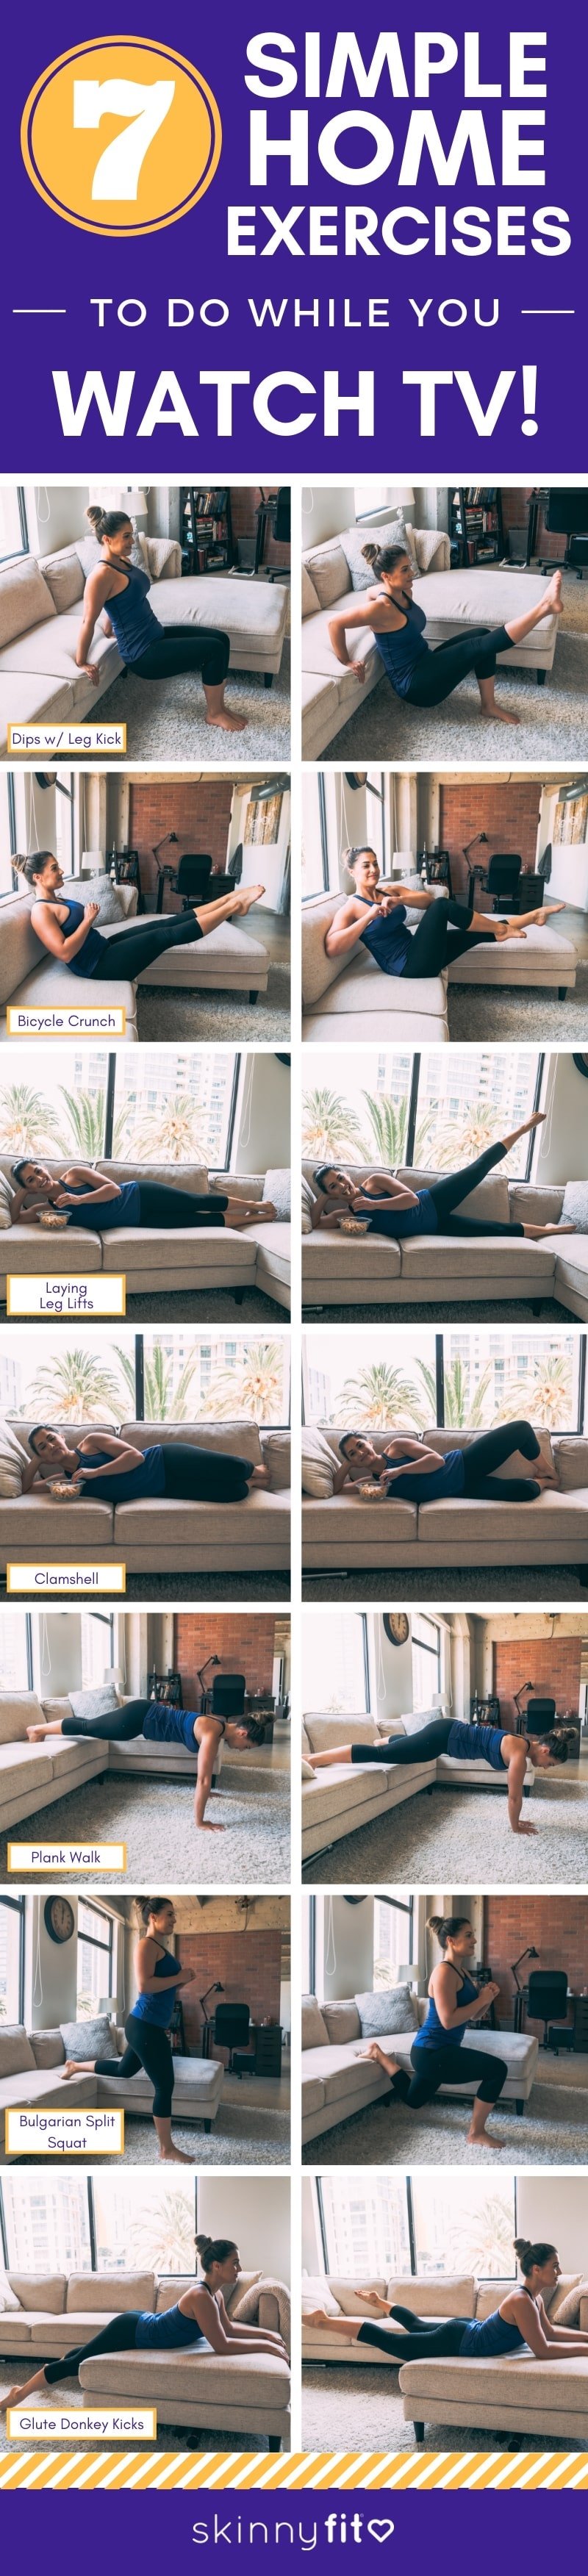 exercises to do while watching tv